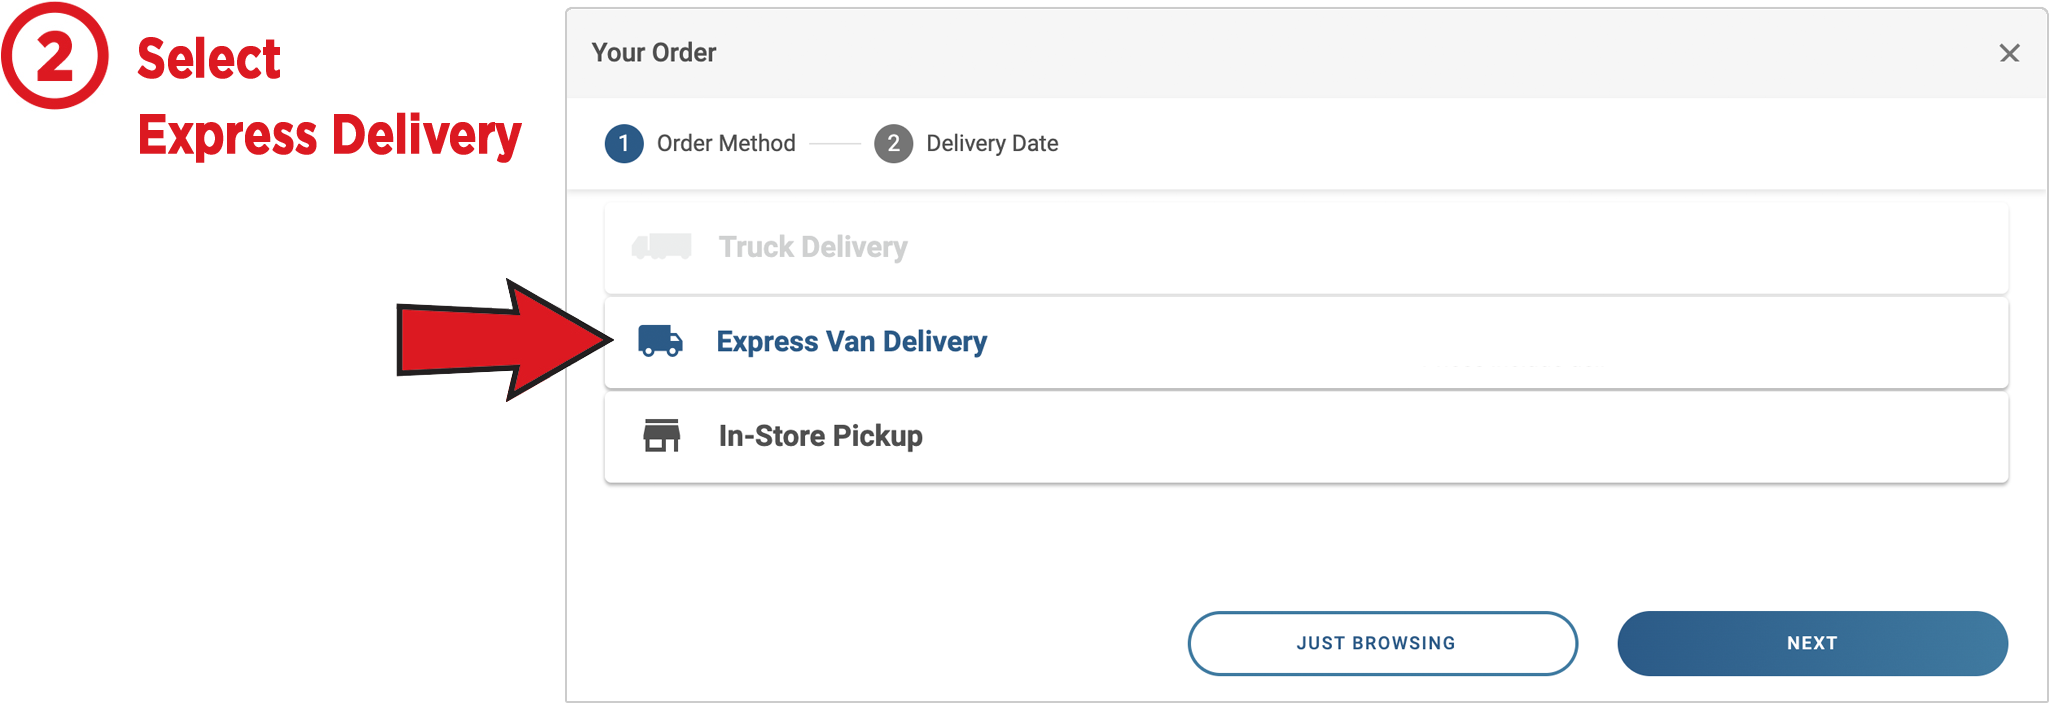 select express delivery